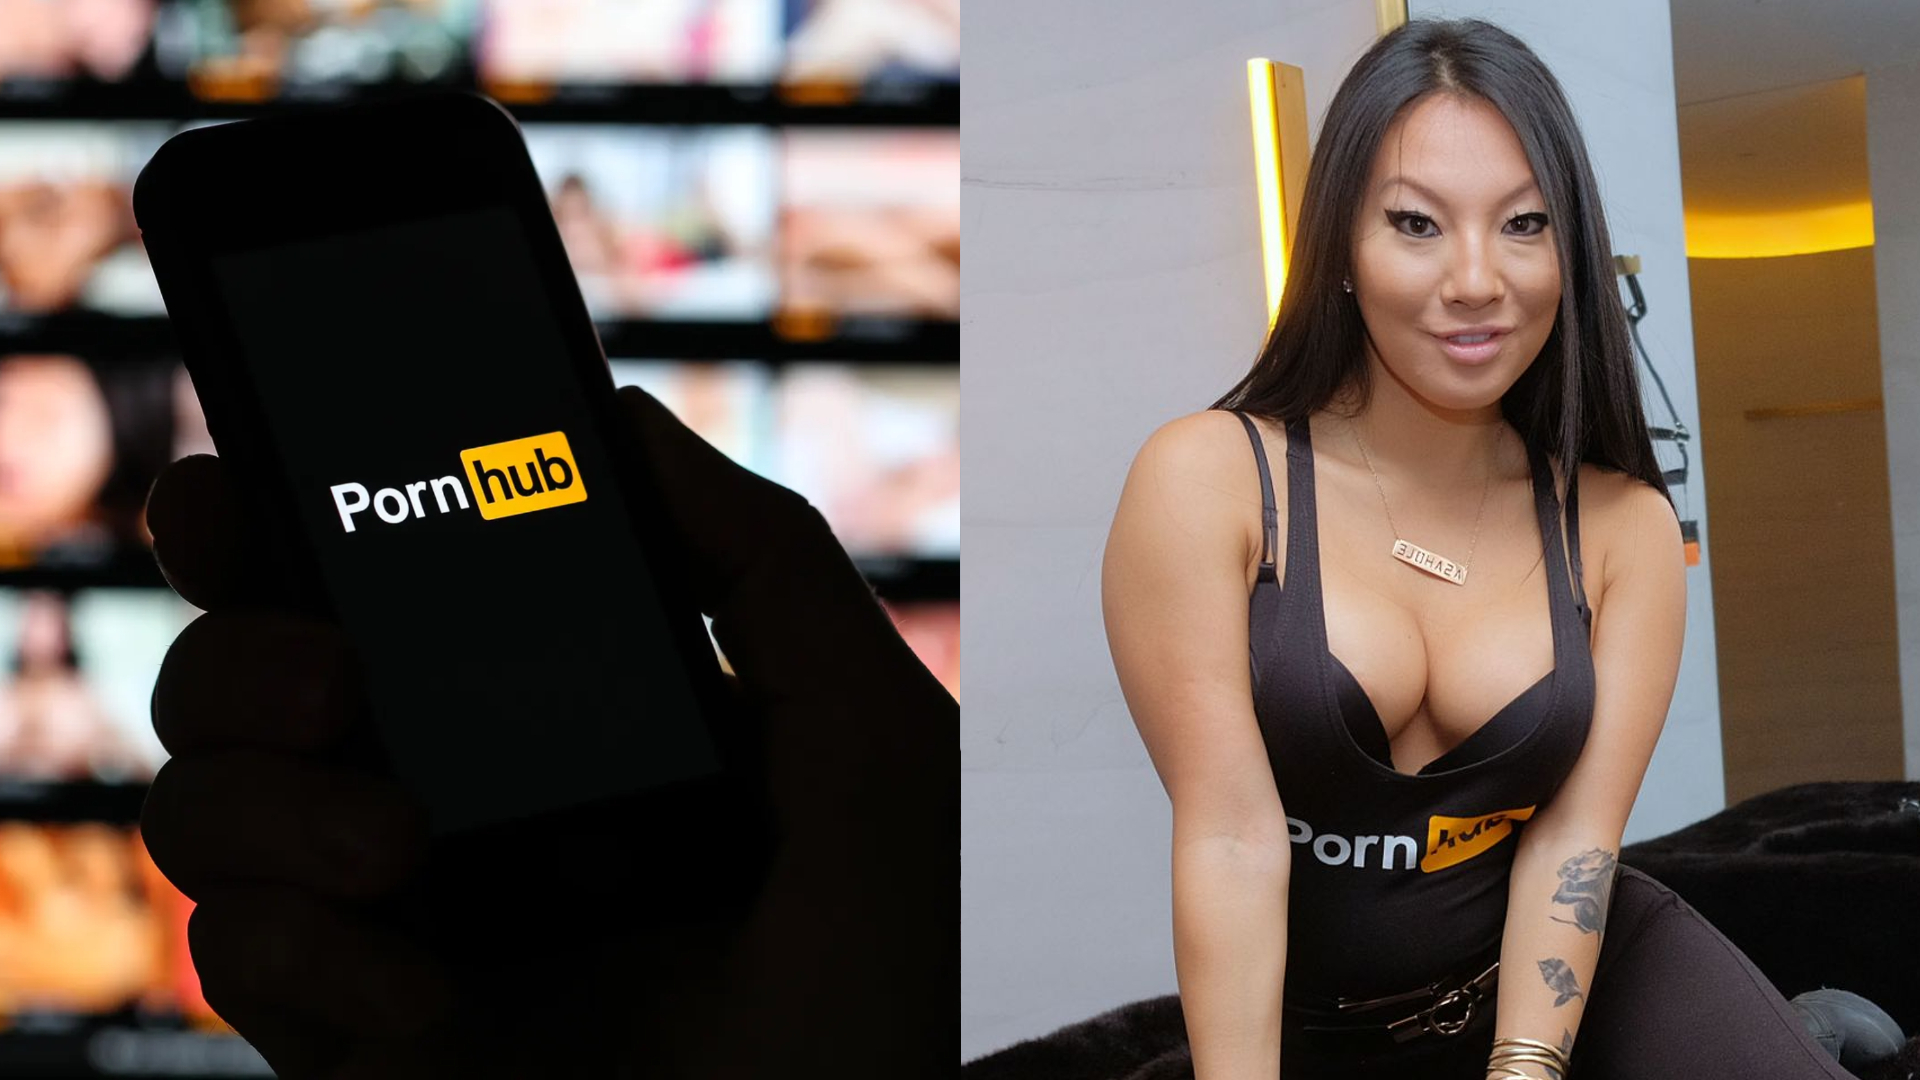 Prunhob - Pornhub Sold To Private Equity Firm For Undisclosed Amount